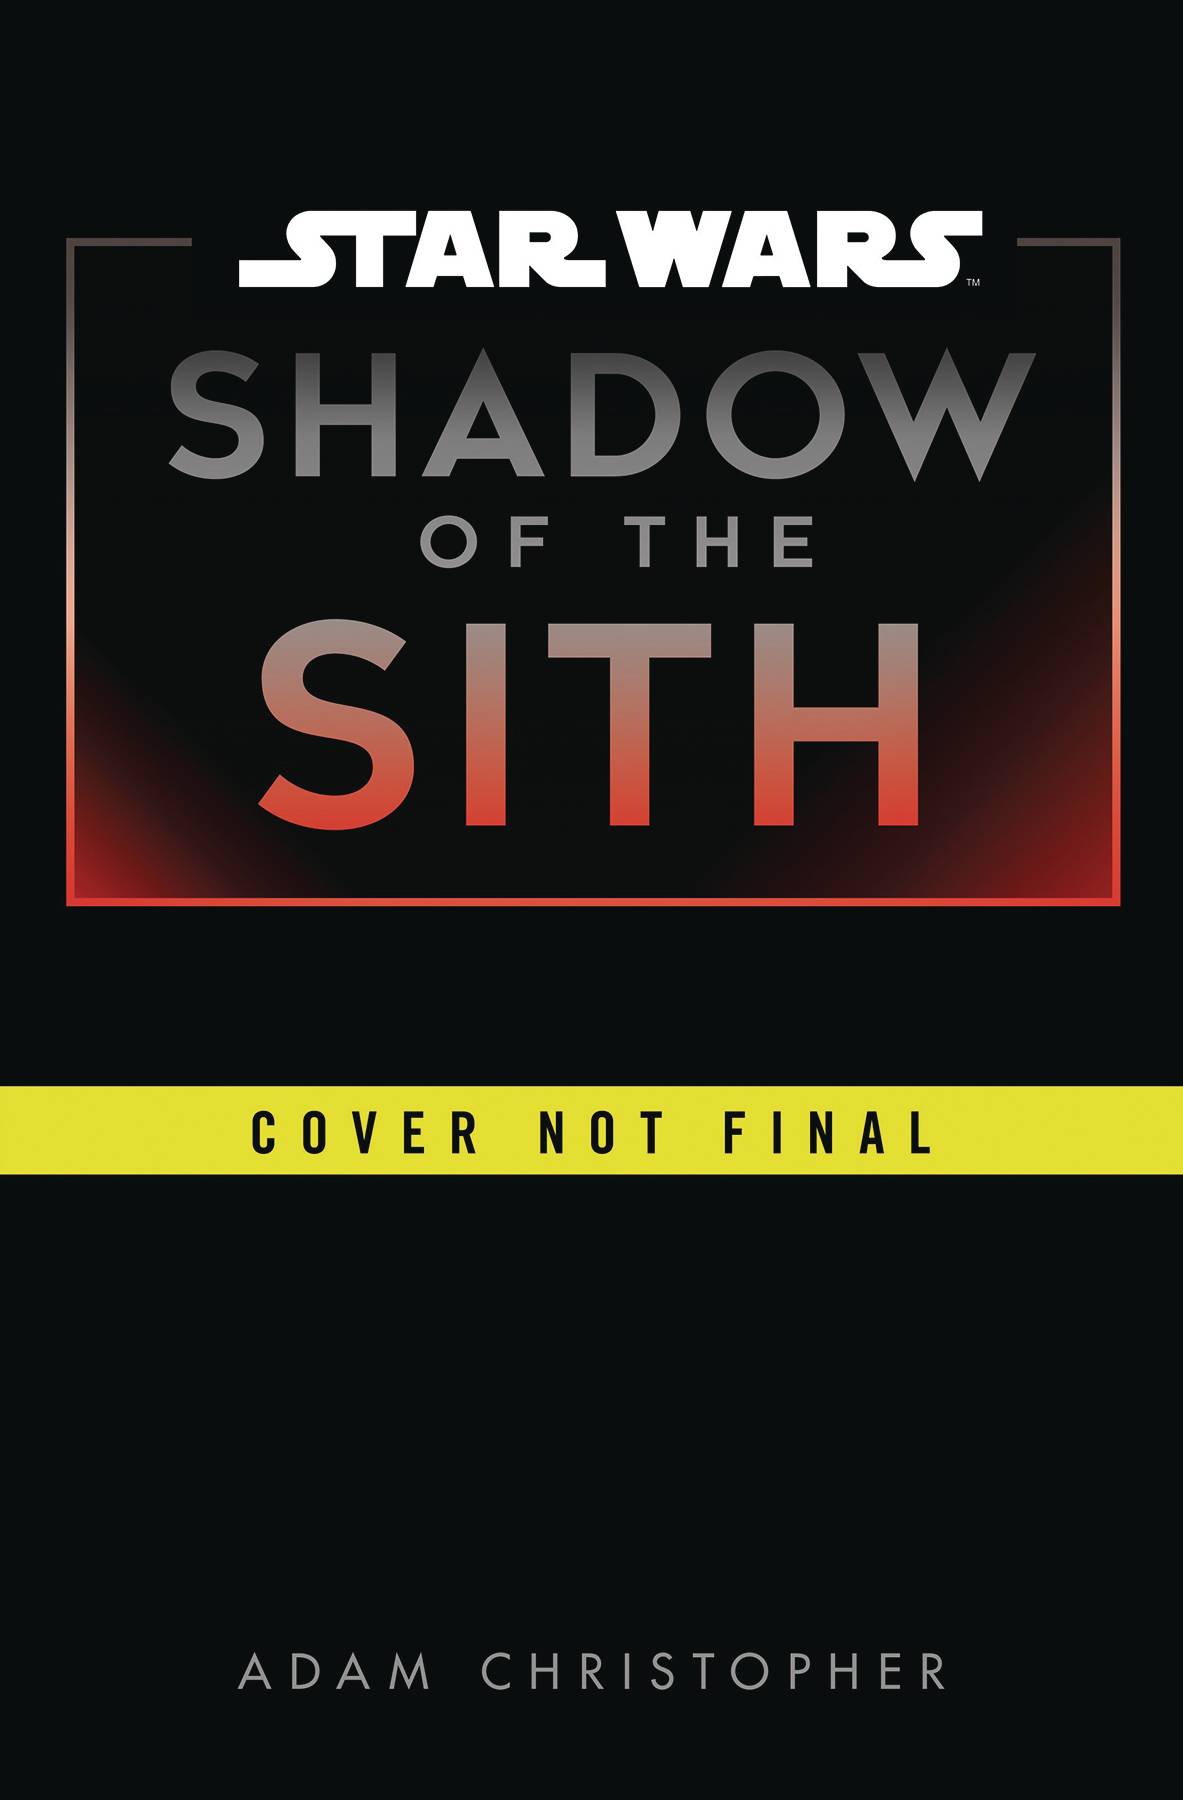 STAR WARS SHADOW OF THE SITH HC